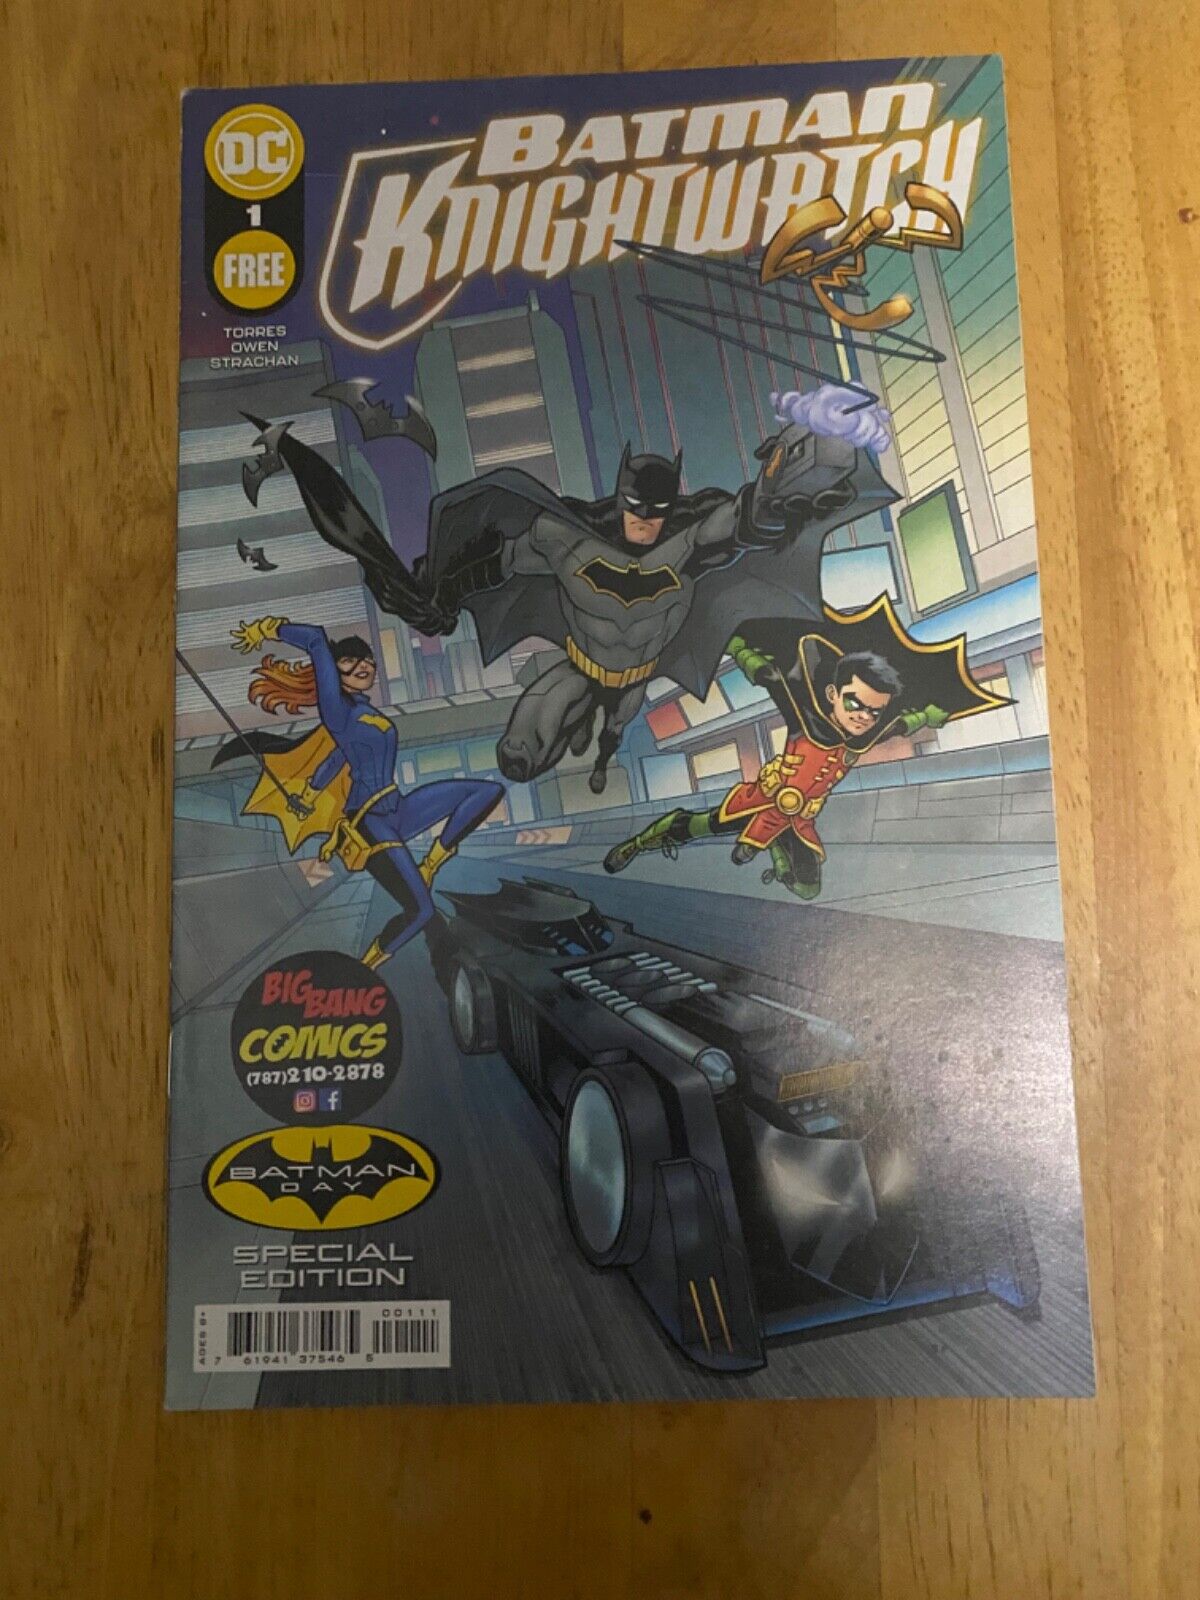 Batman Knightwatch Special Edition #1 by Torres and Owen